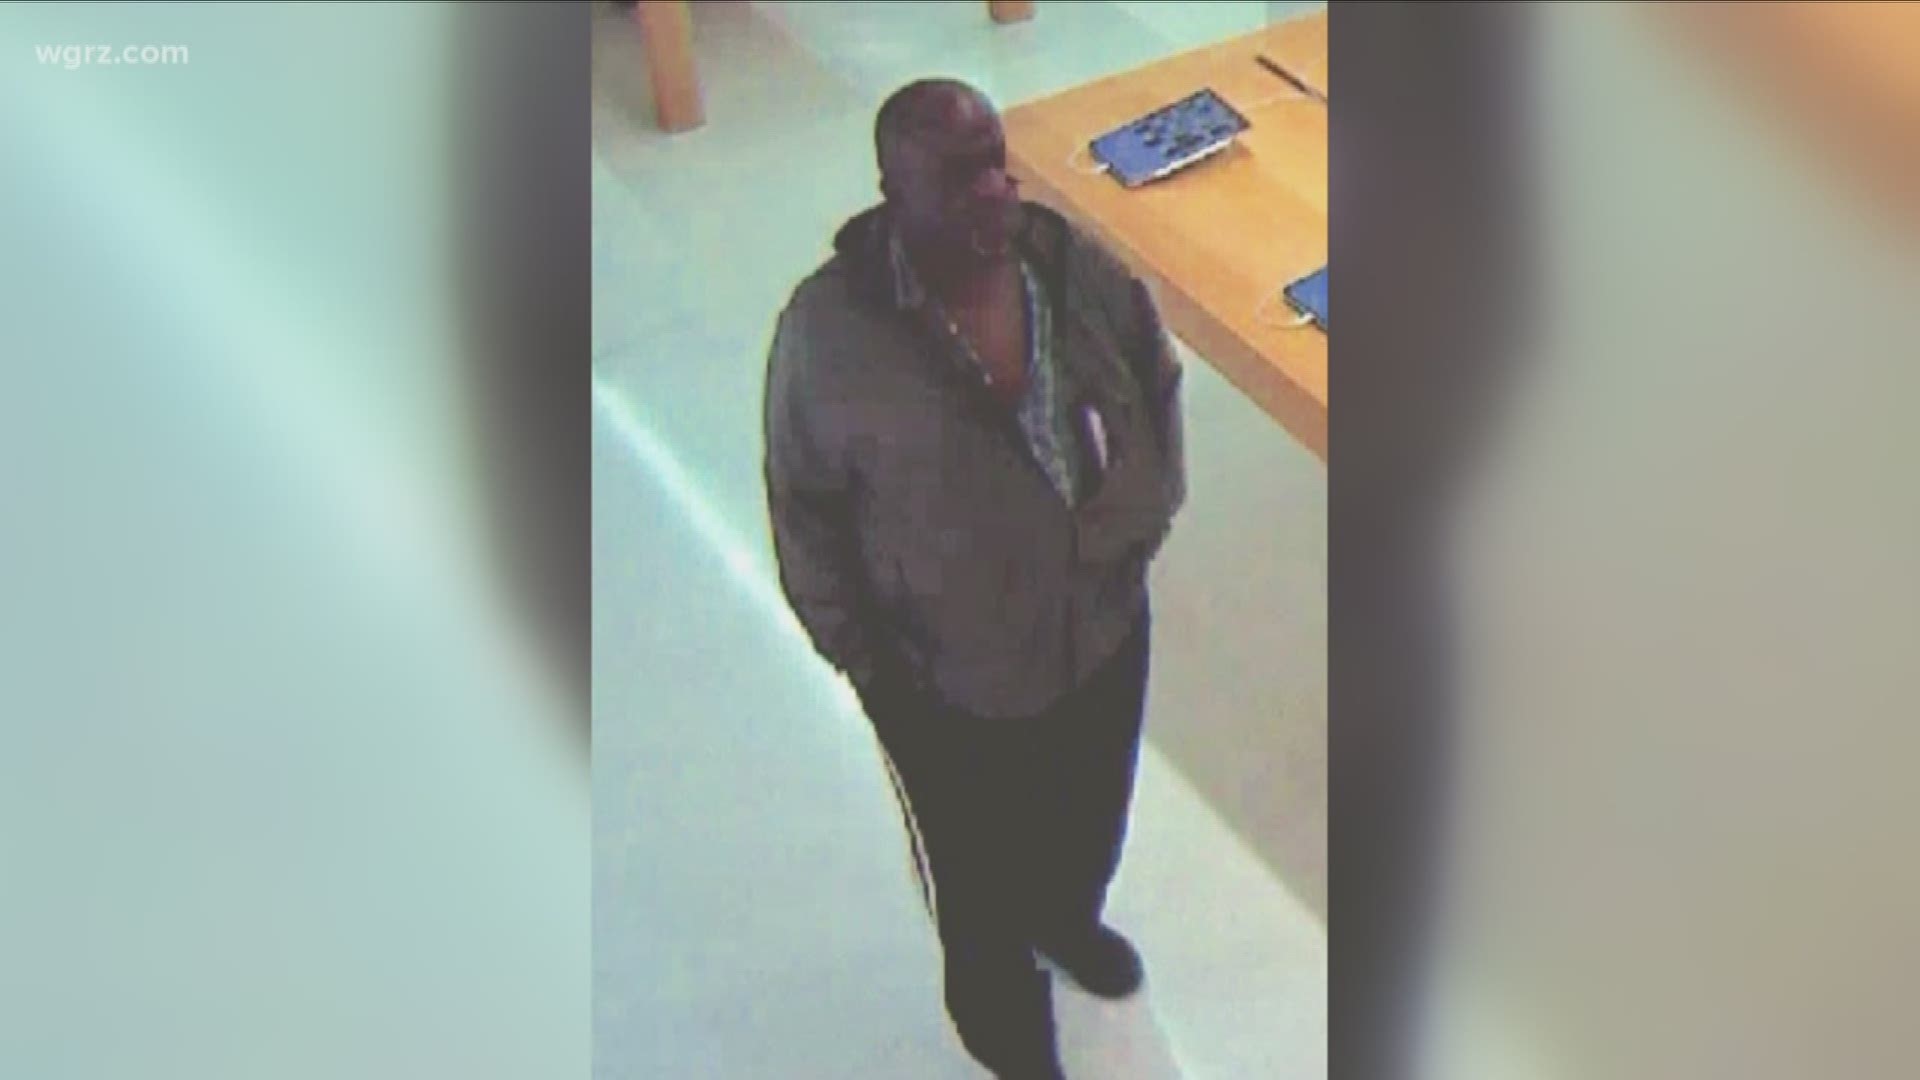 Police believe this man and woman stole thousands of dollars in headphones from the Apple store at the Walden Galleria.